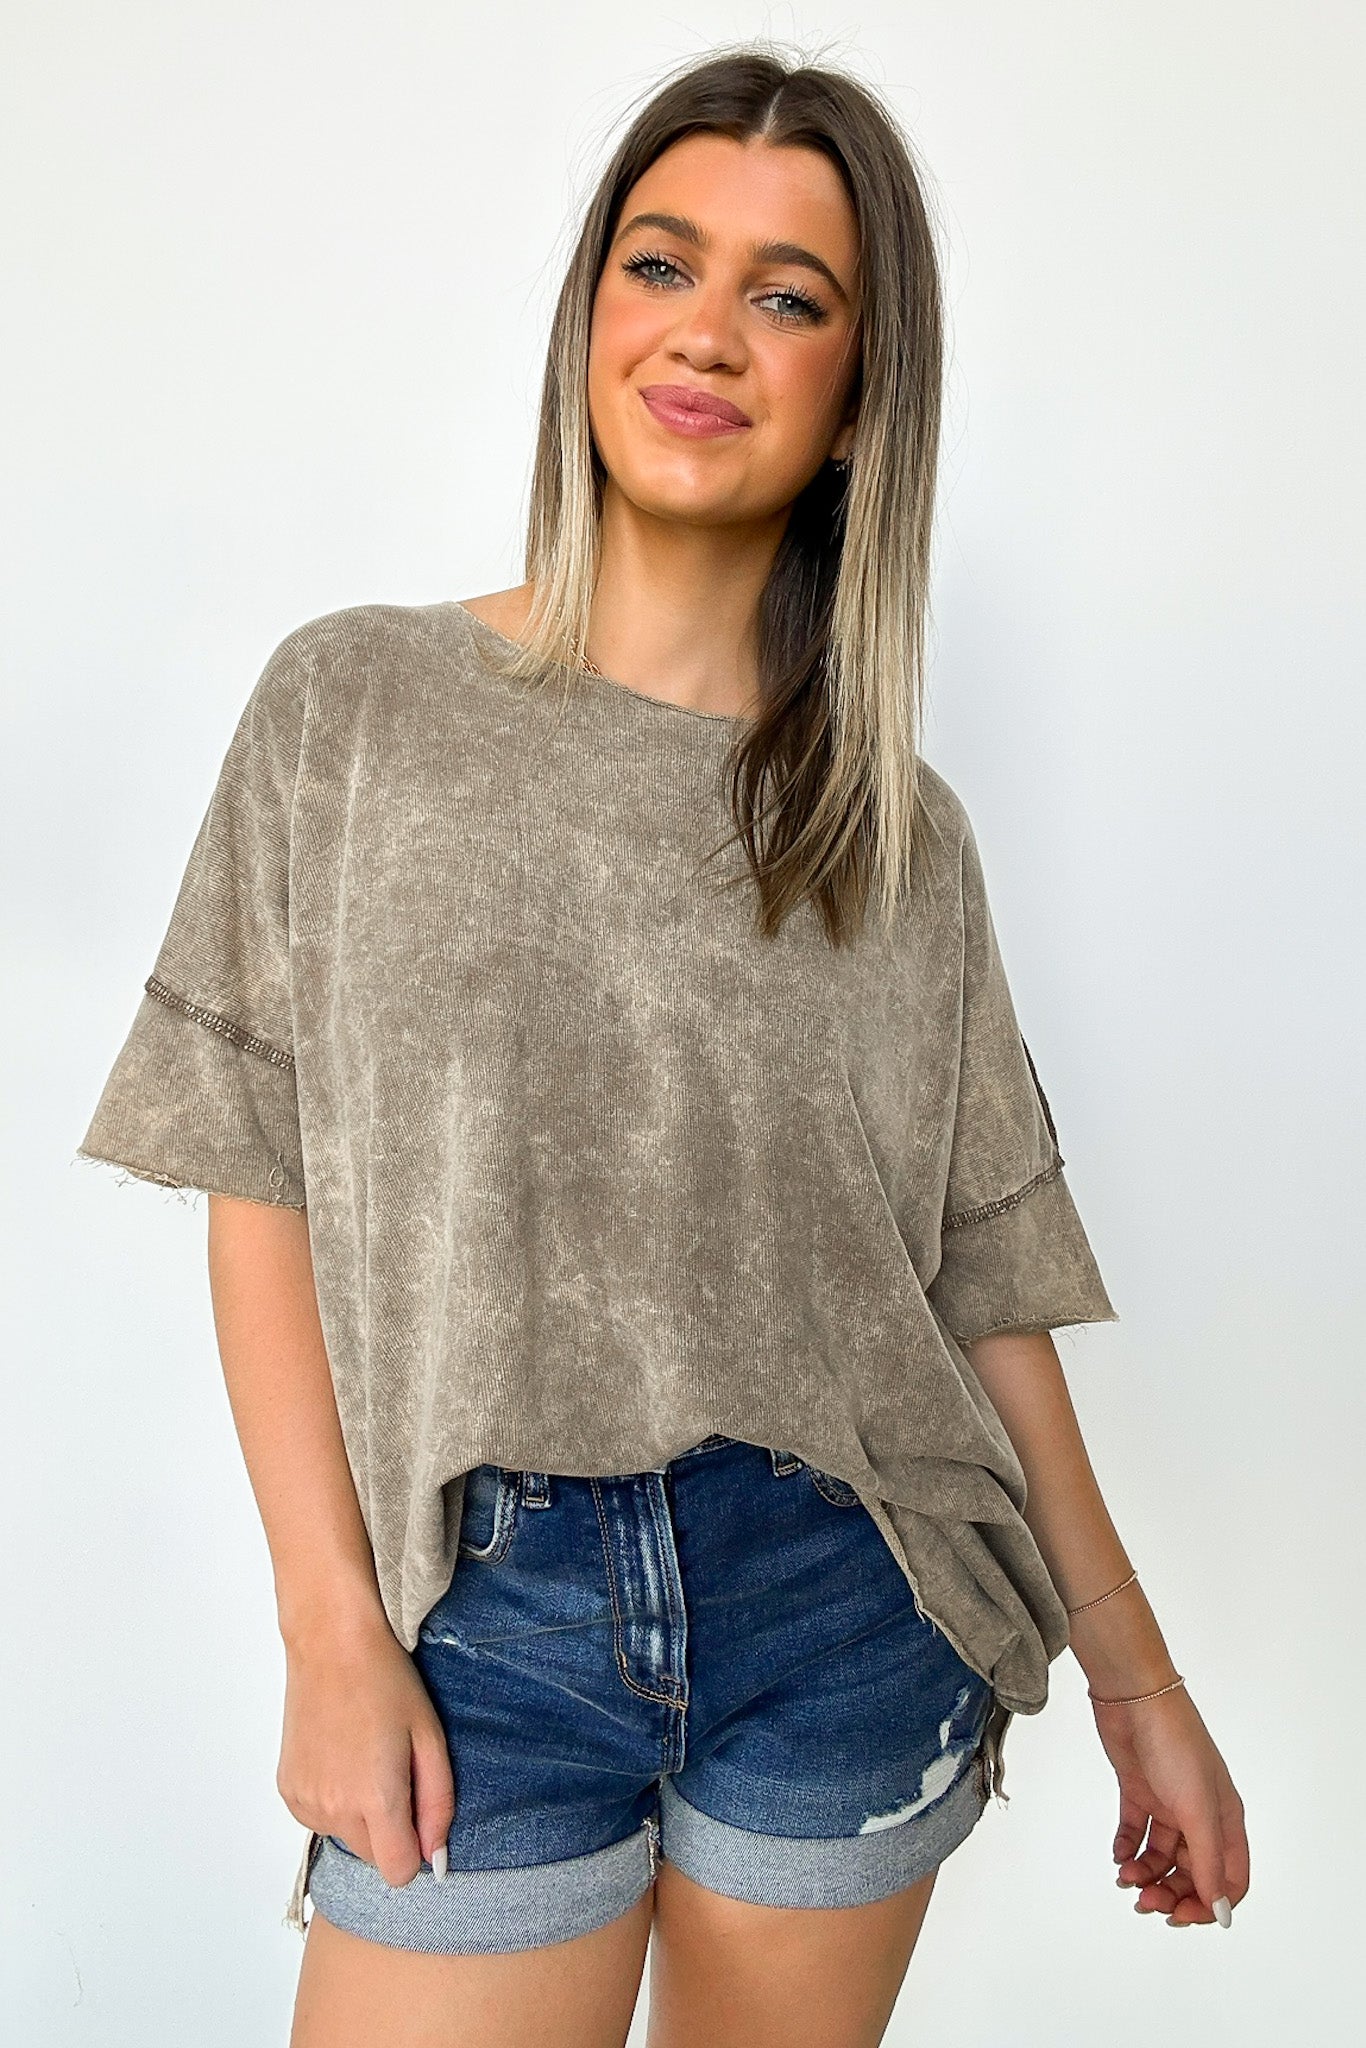  Amayah Mineral Wash Raw Edge Top - BACK IN STOCK - Madison and Mallory